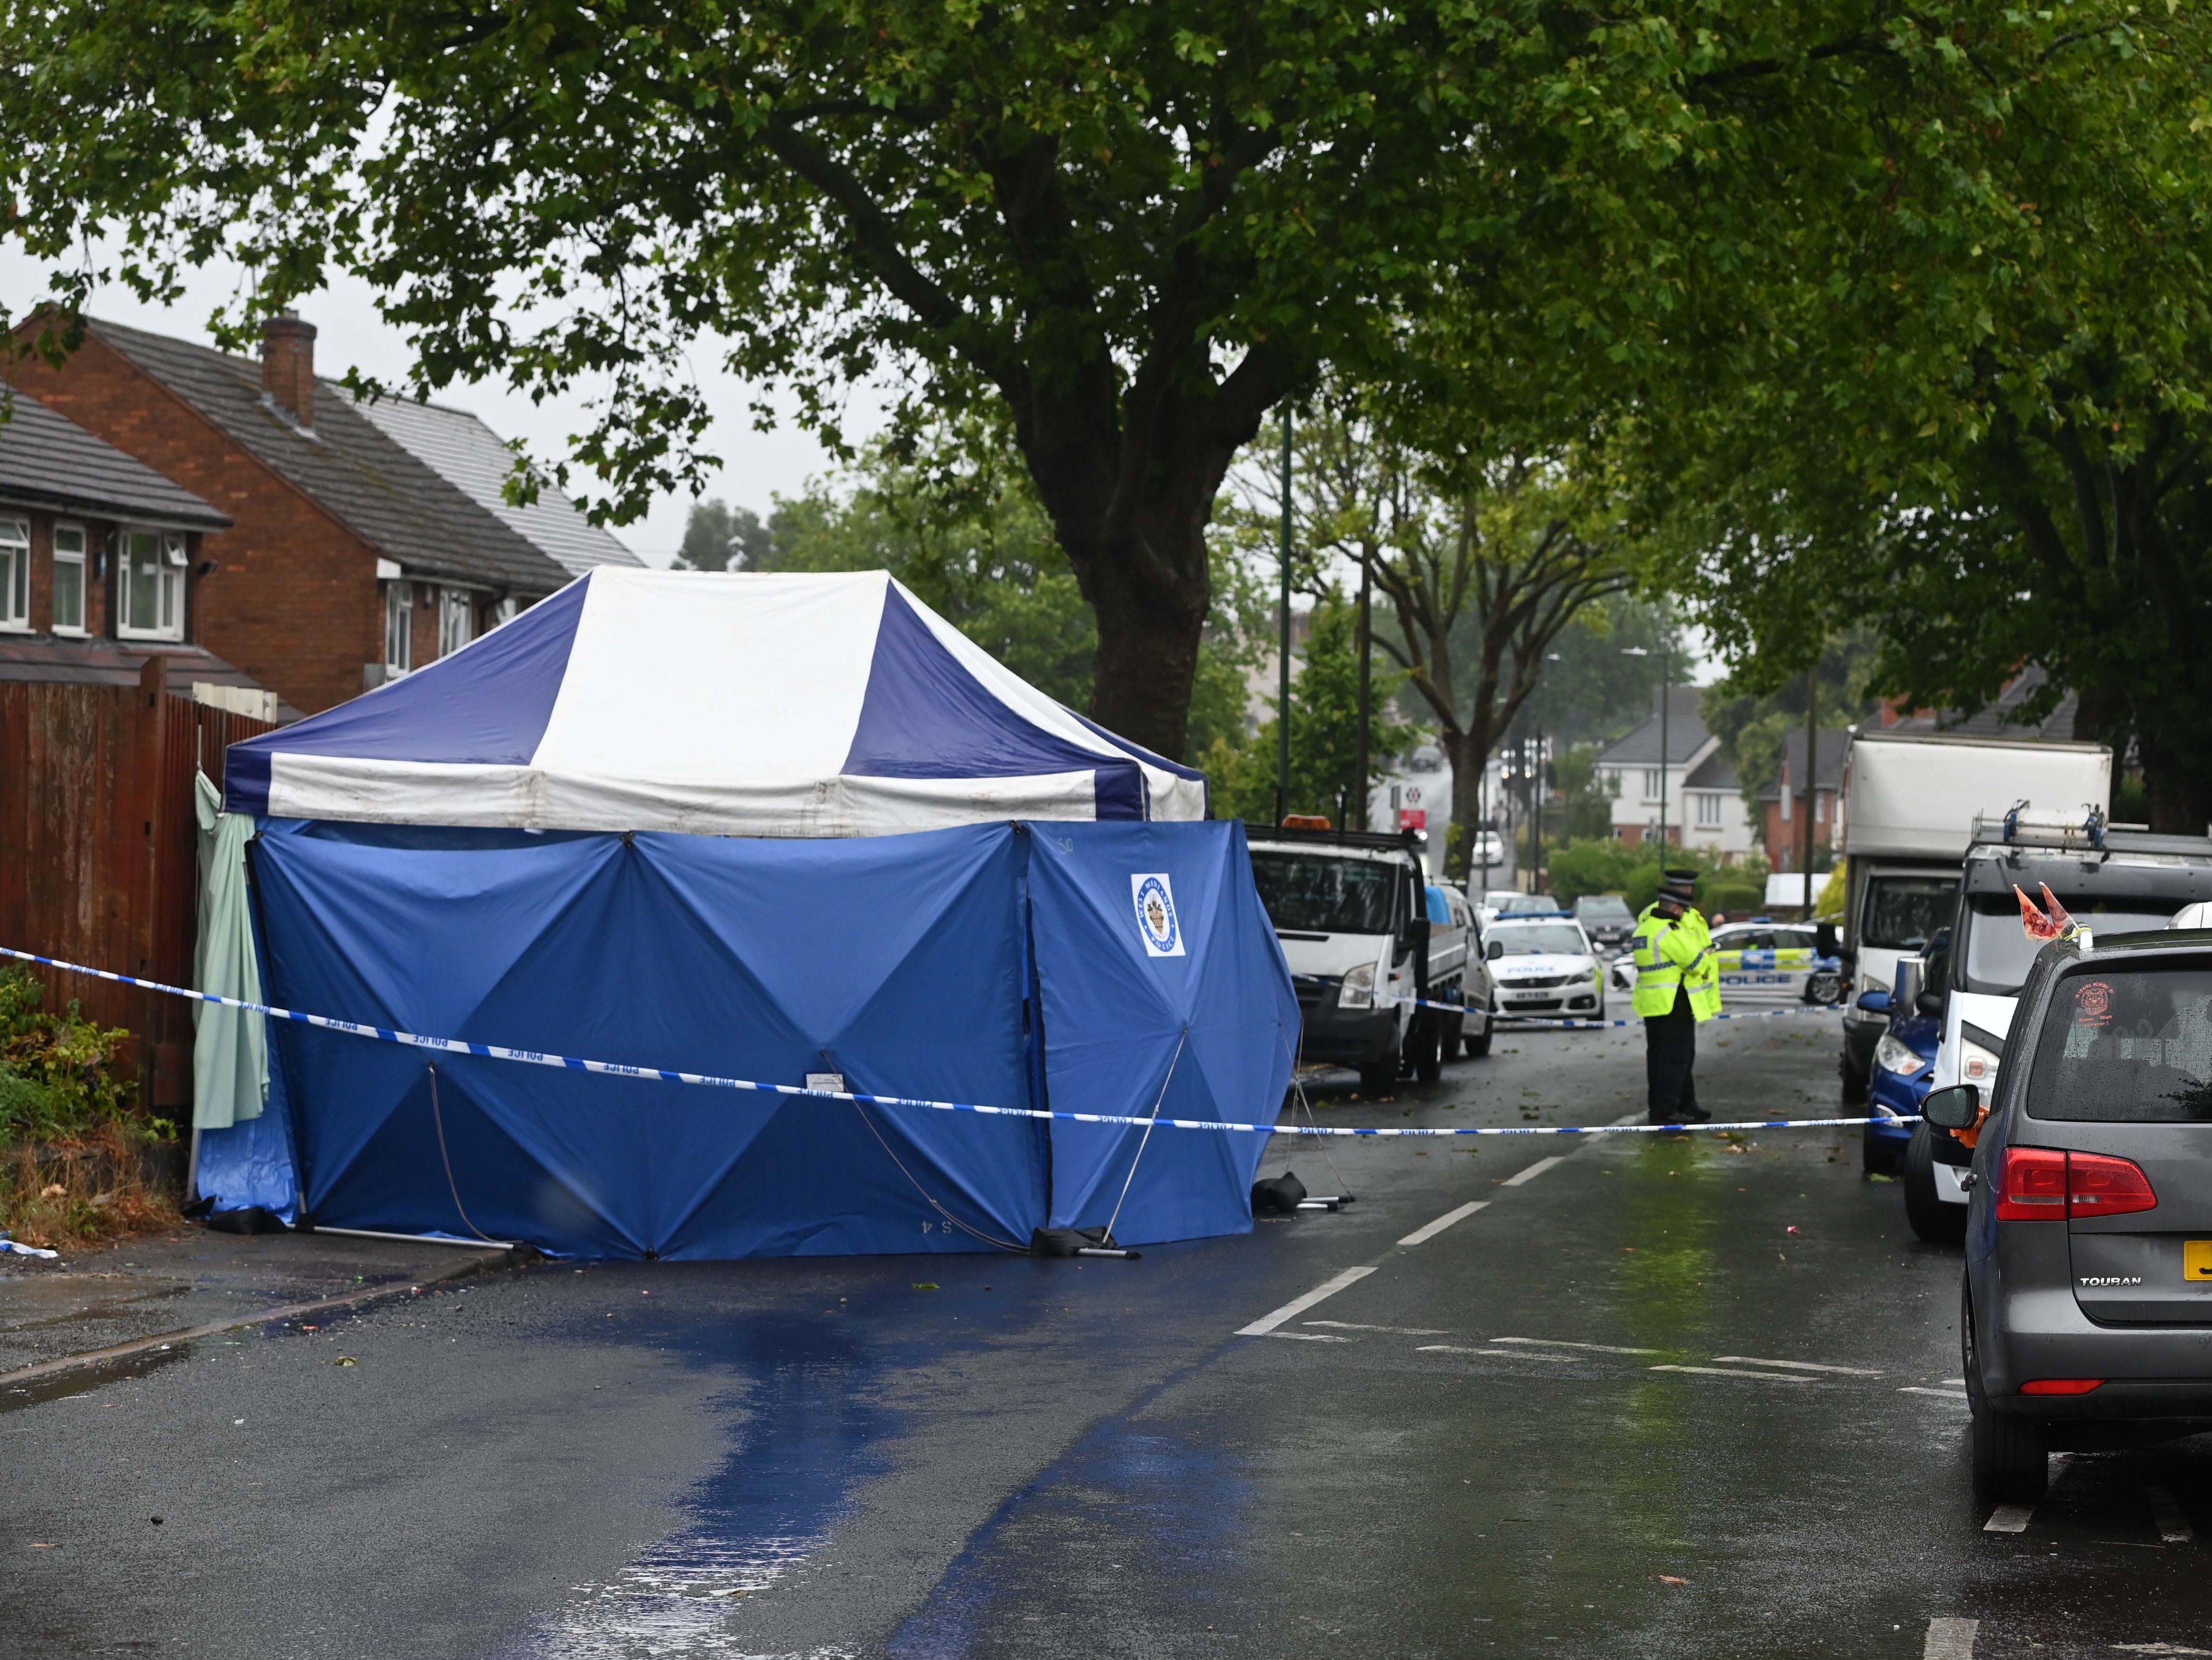 Walsall murder probe: Trio aged 18 and 17 arrested after man shot dead in 'targeted attack'